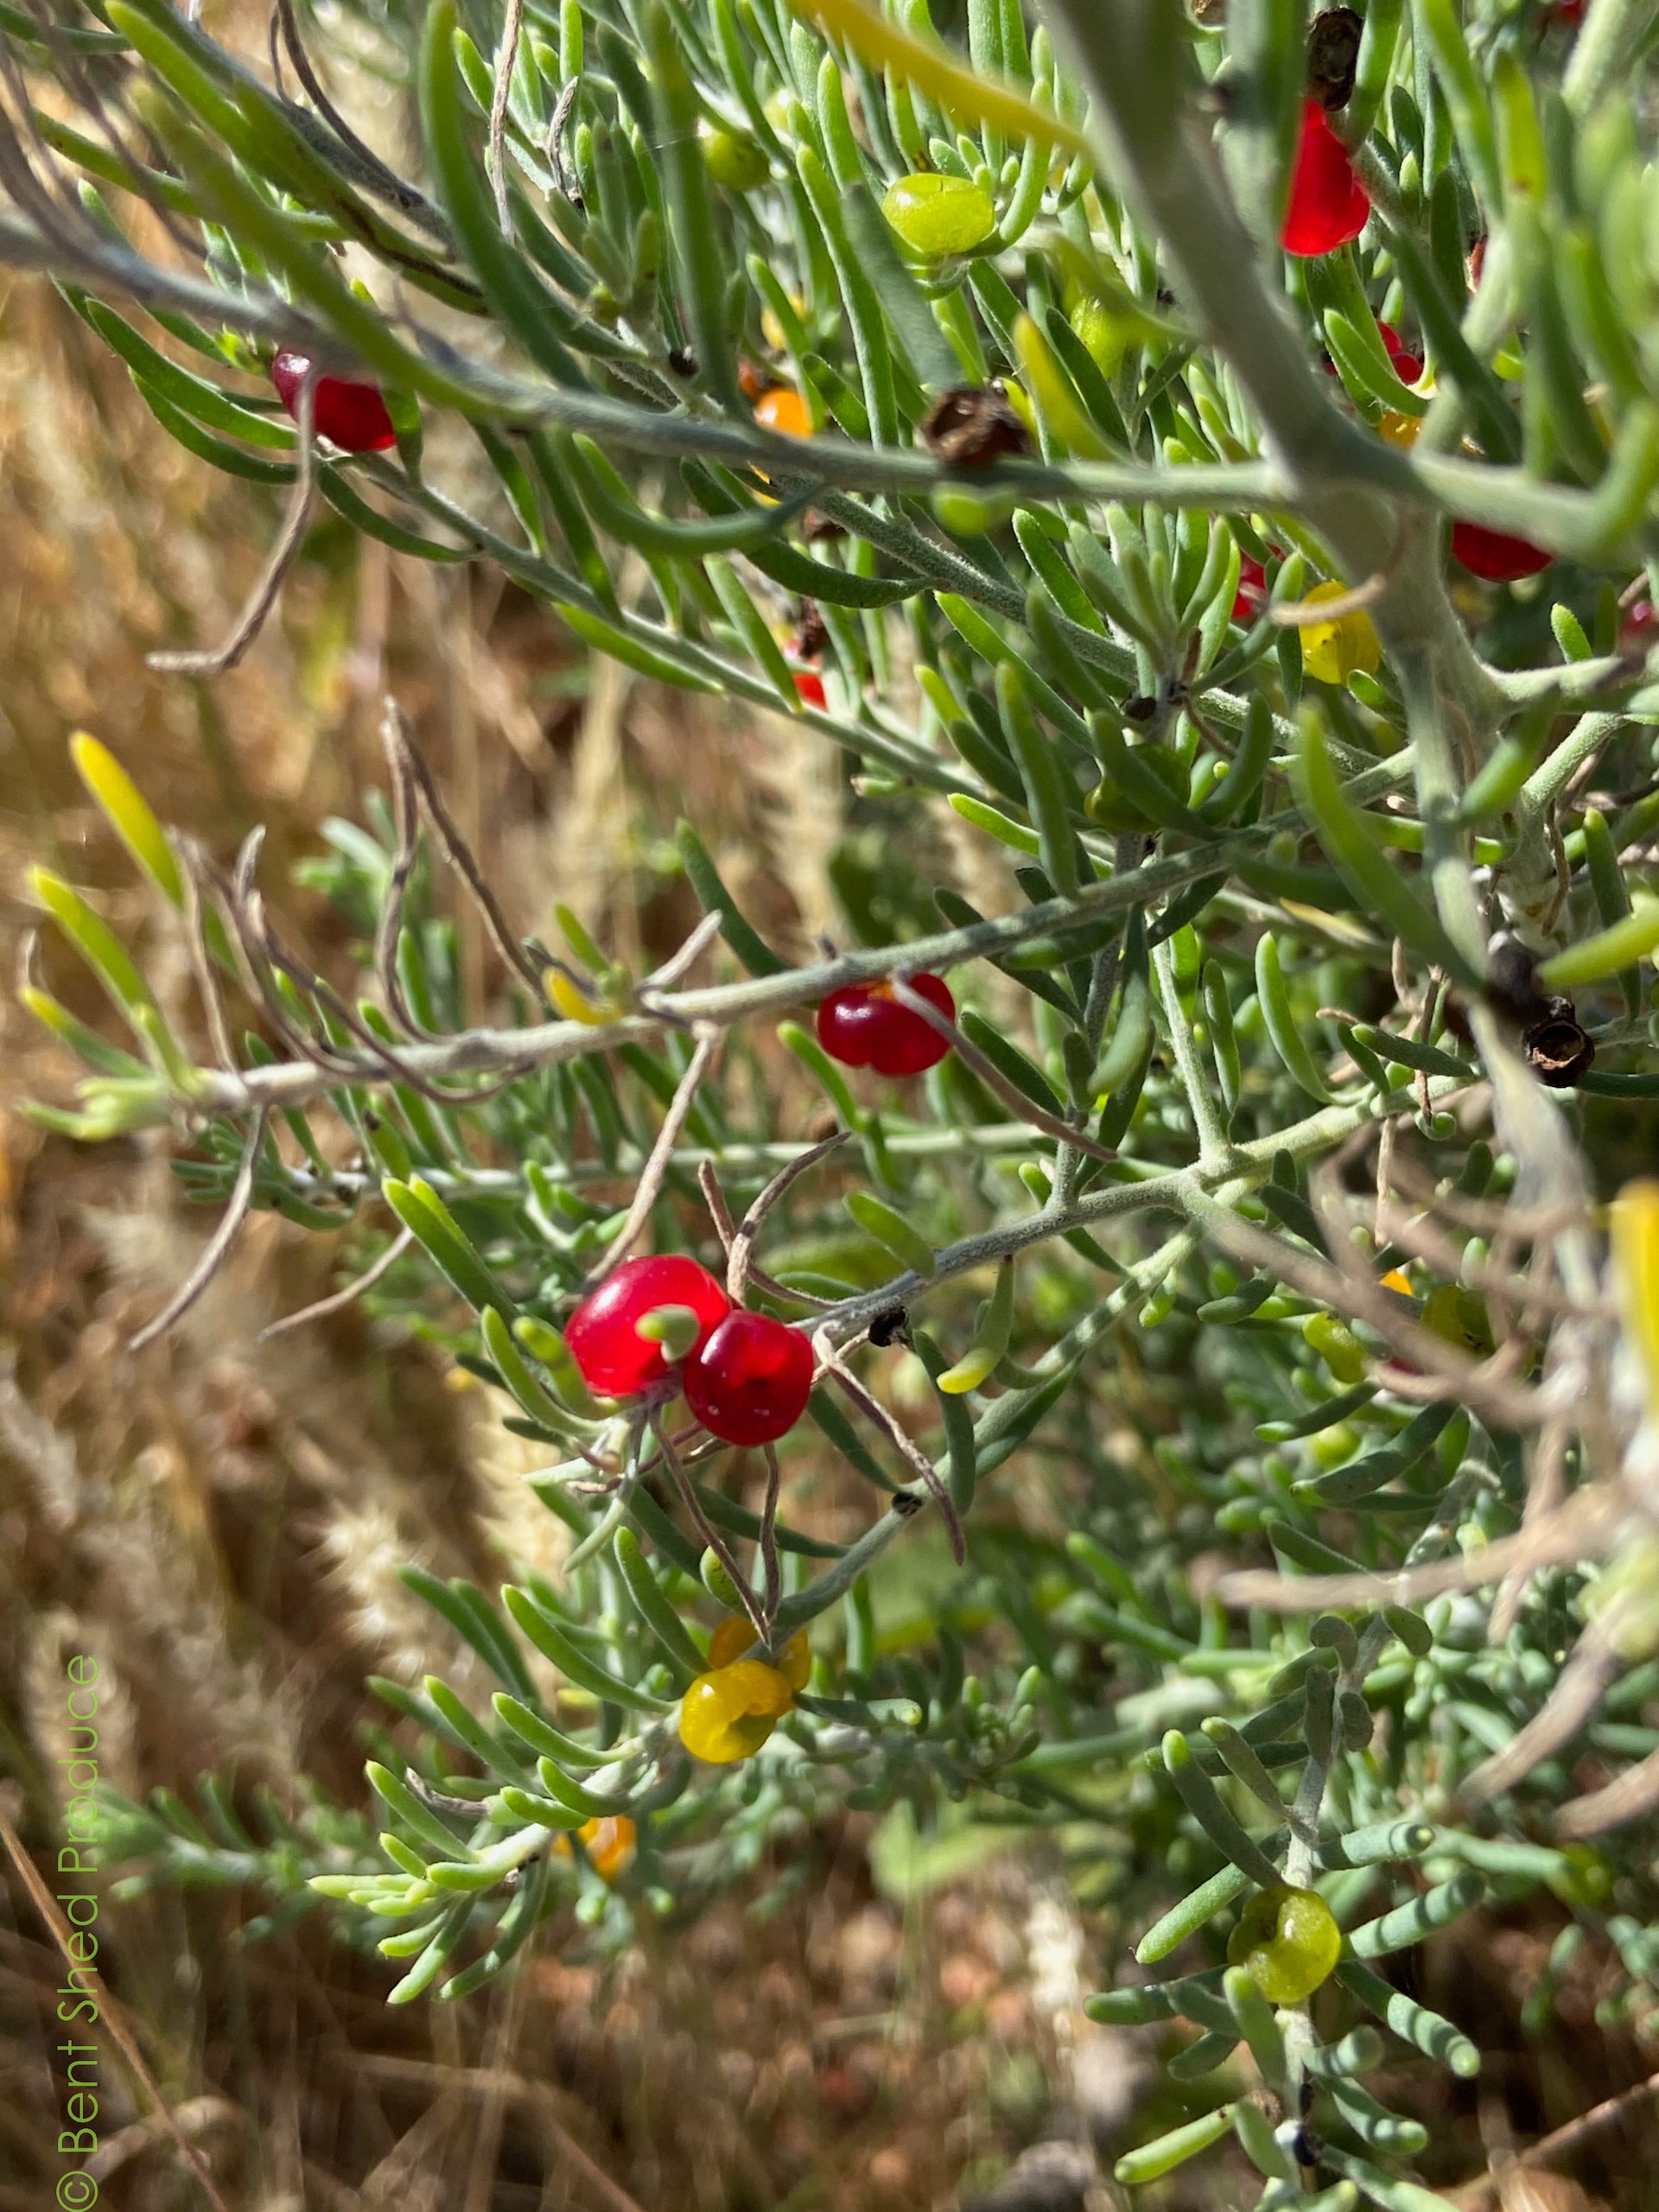 Small, flat red and yellow berries are interspersed with narrow leaves on a grey-green branch